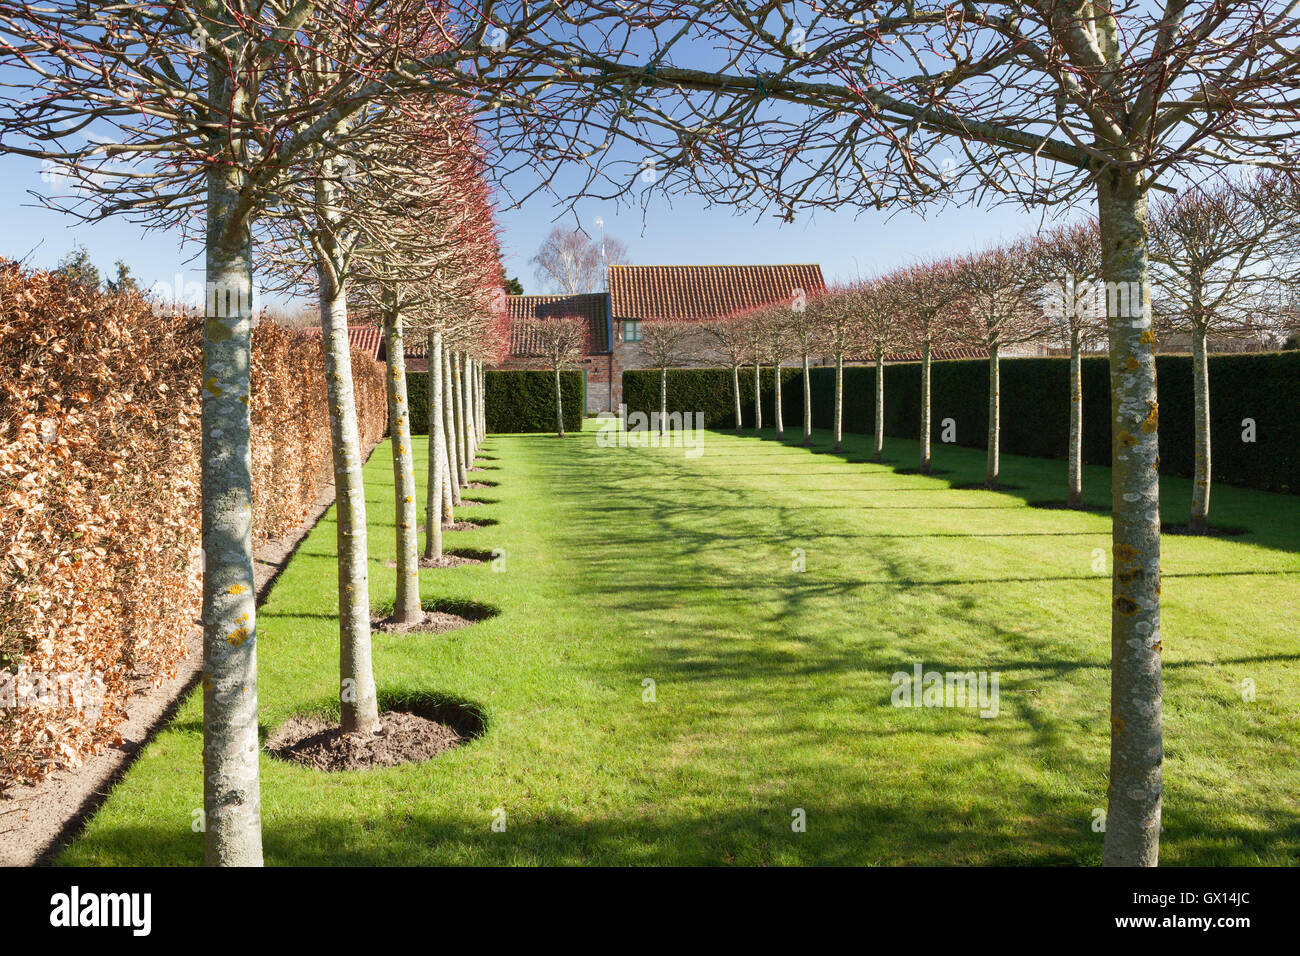 Cathedral garden. Brightwater Gardens, Saxby, Lincolnshire, UK. Winter, February 2016. Stock Photo